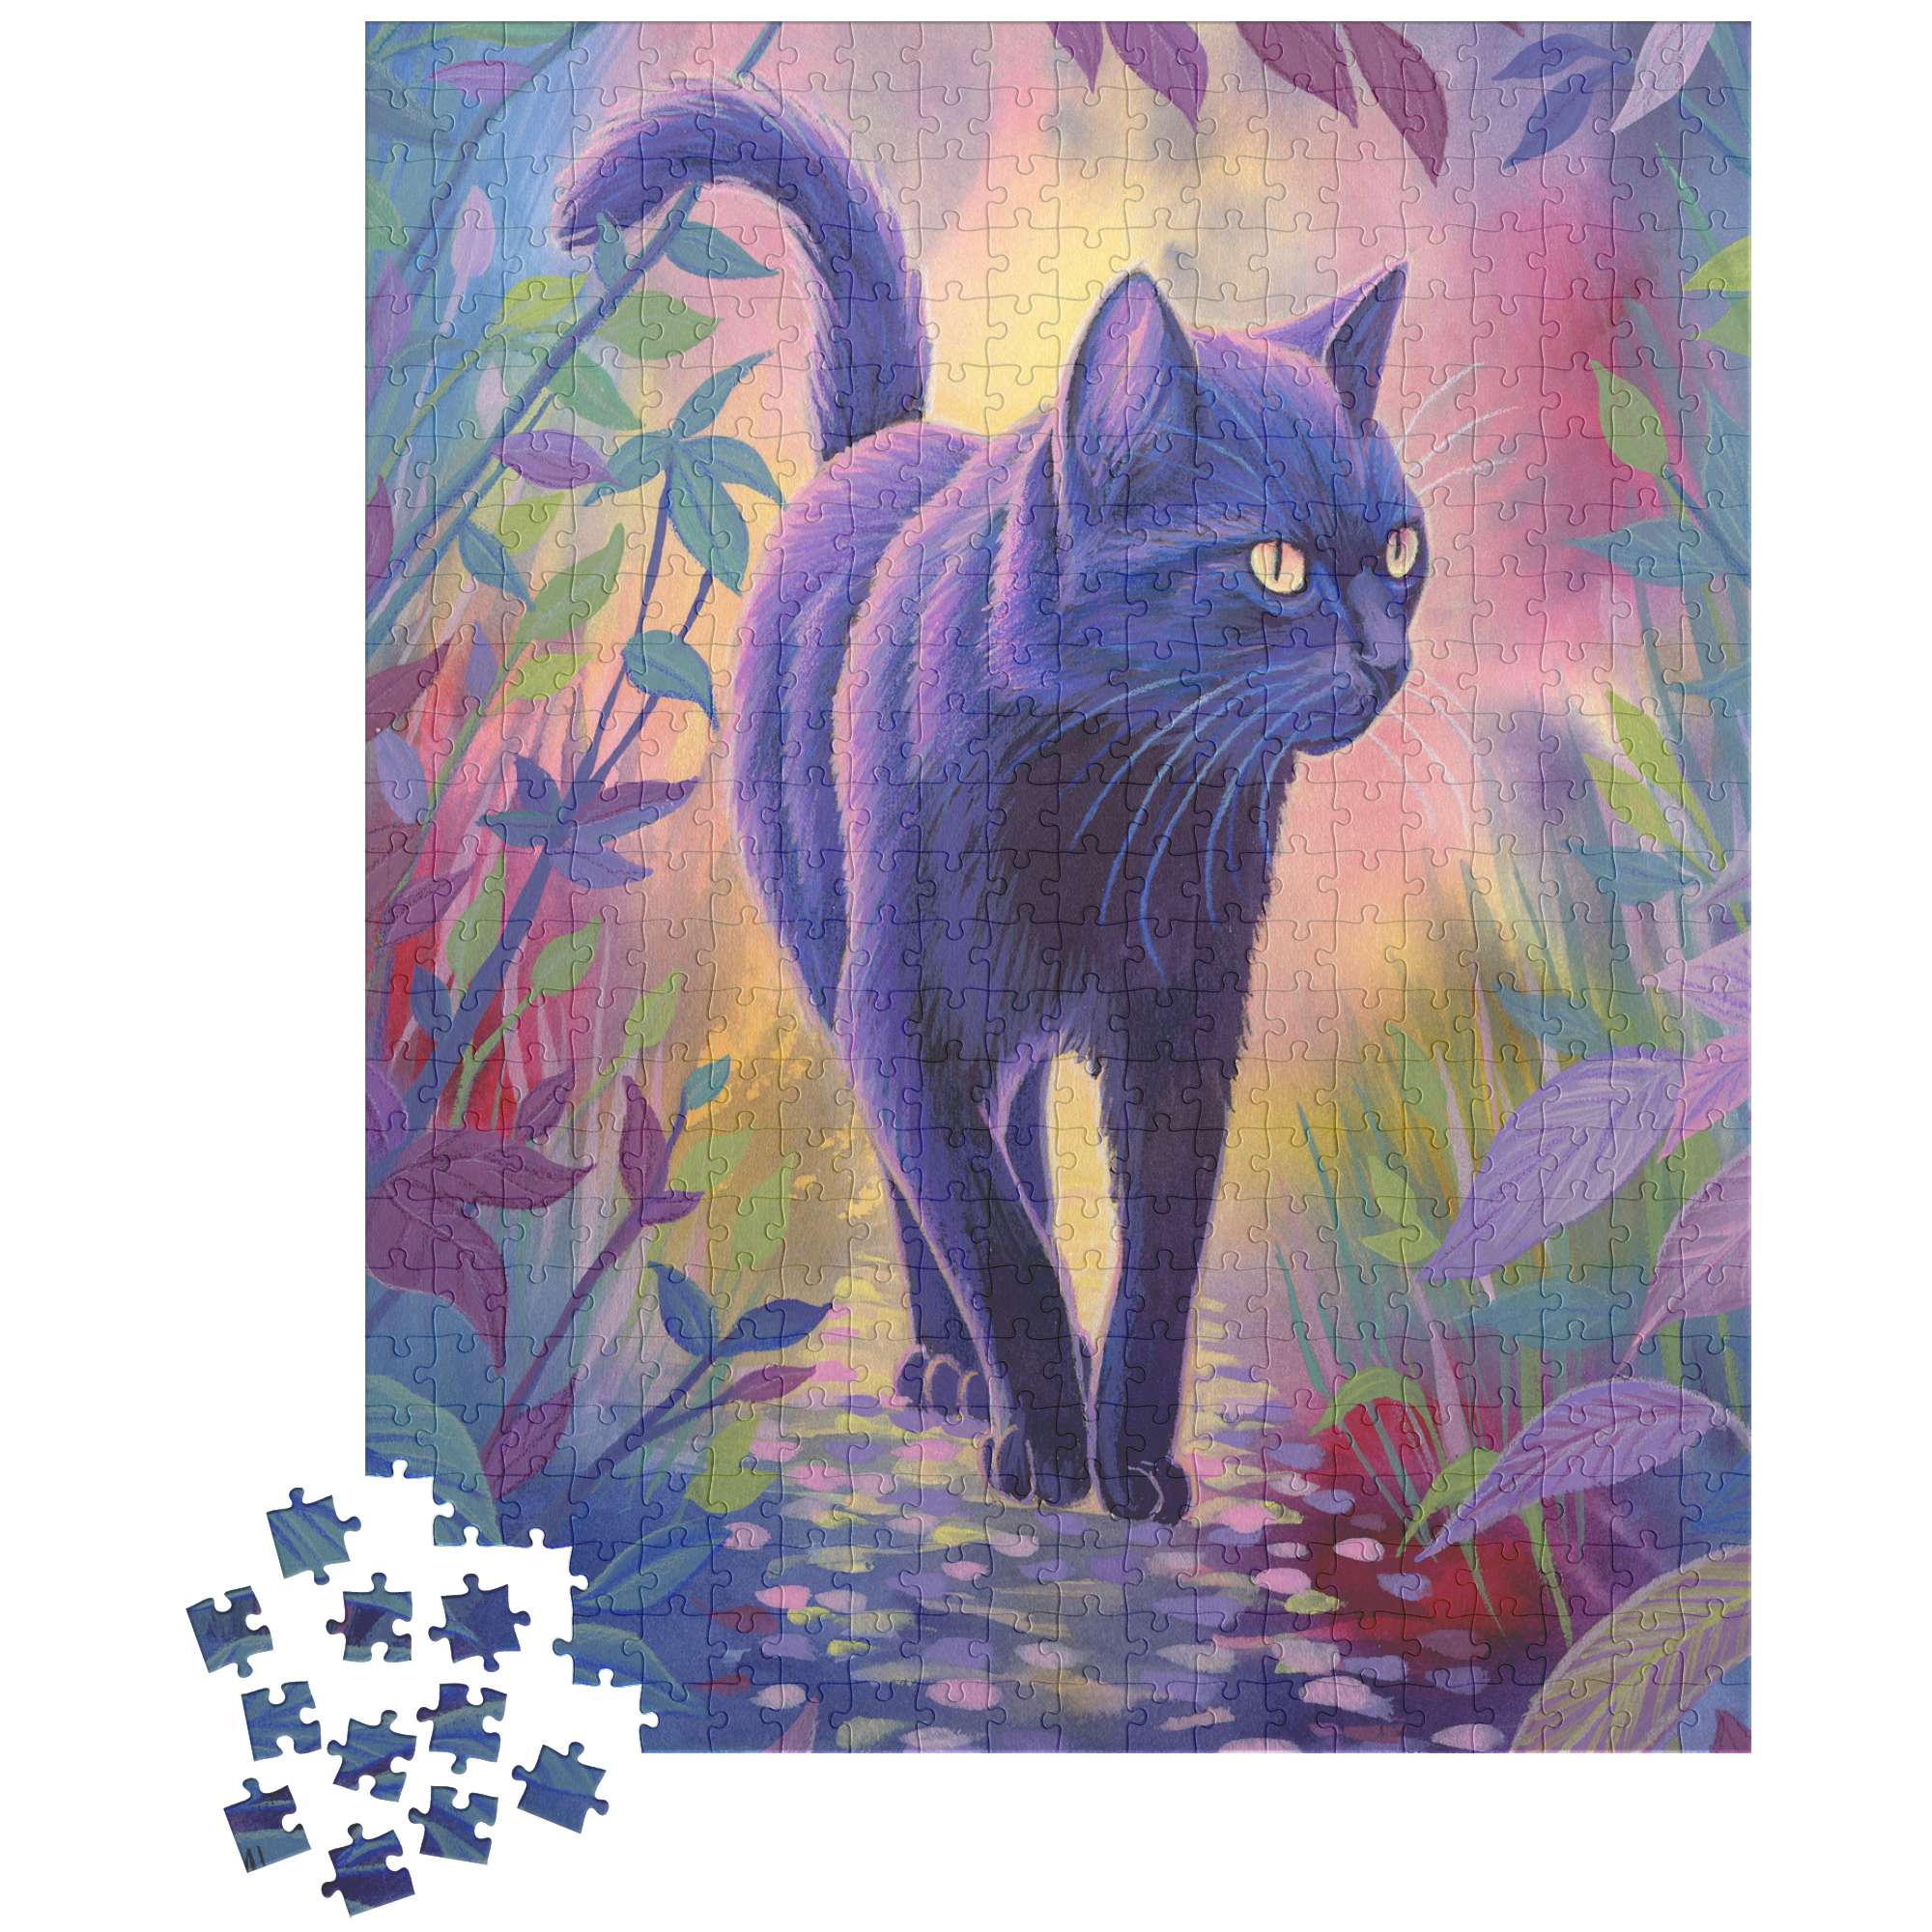 A Cat Puzzle of a black cat walking on a colorful stone path, surrounded by vibrant plants, with puzzle pieces scattered in the corner.